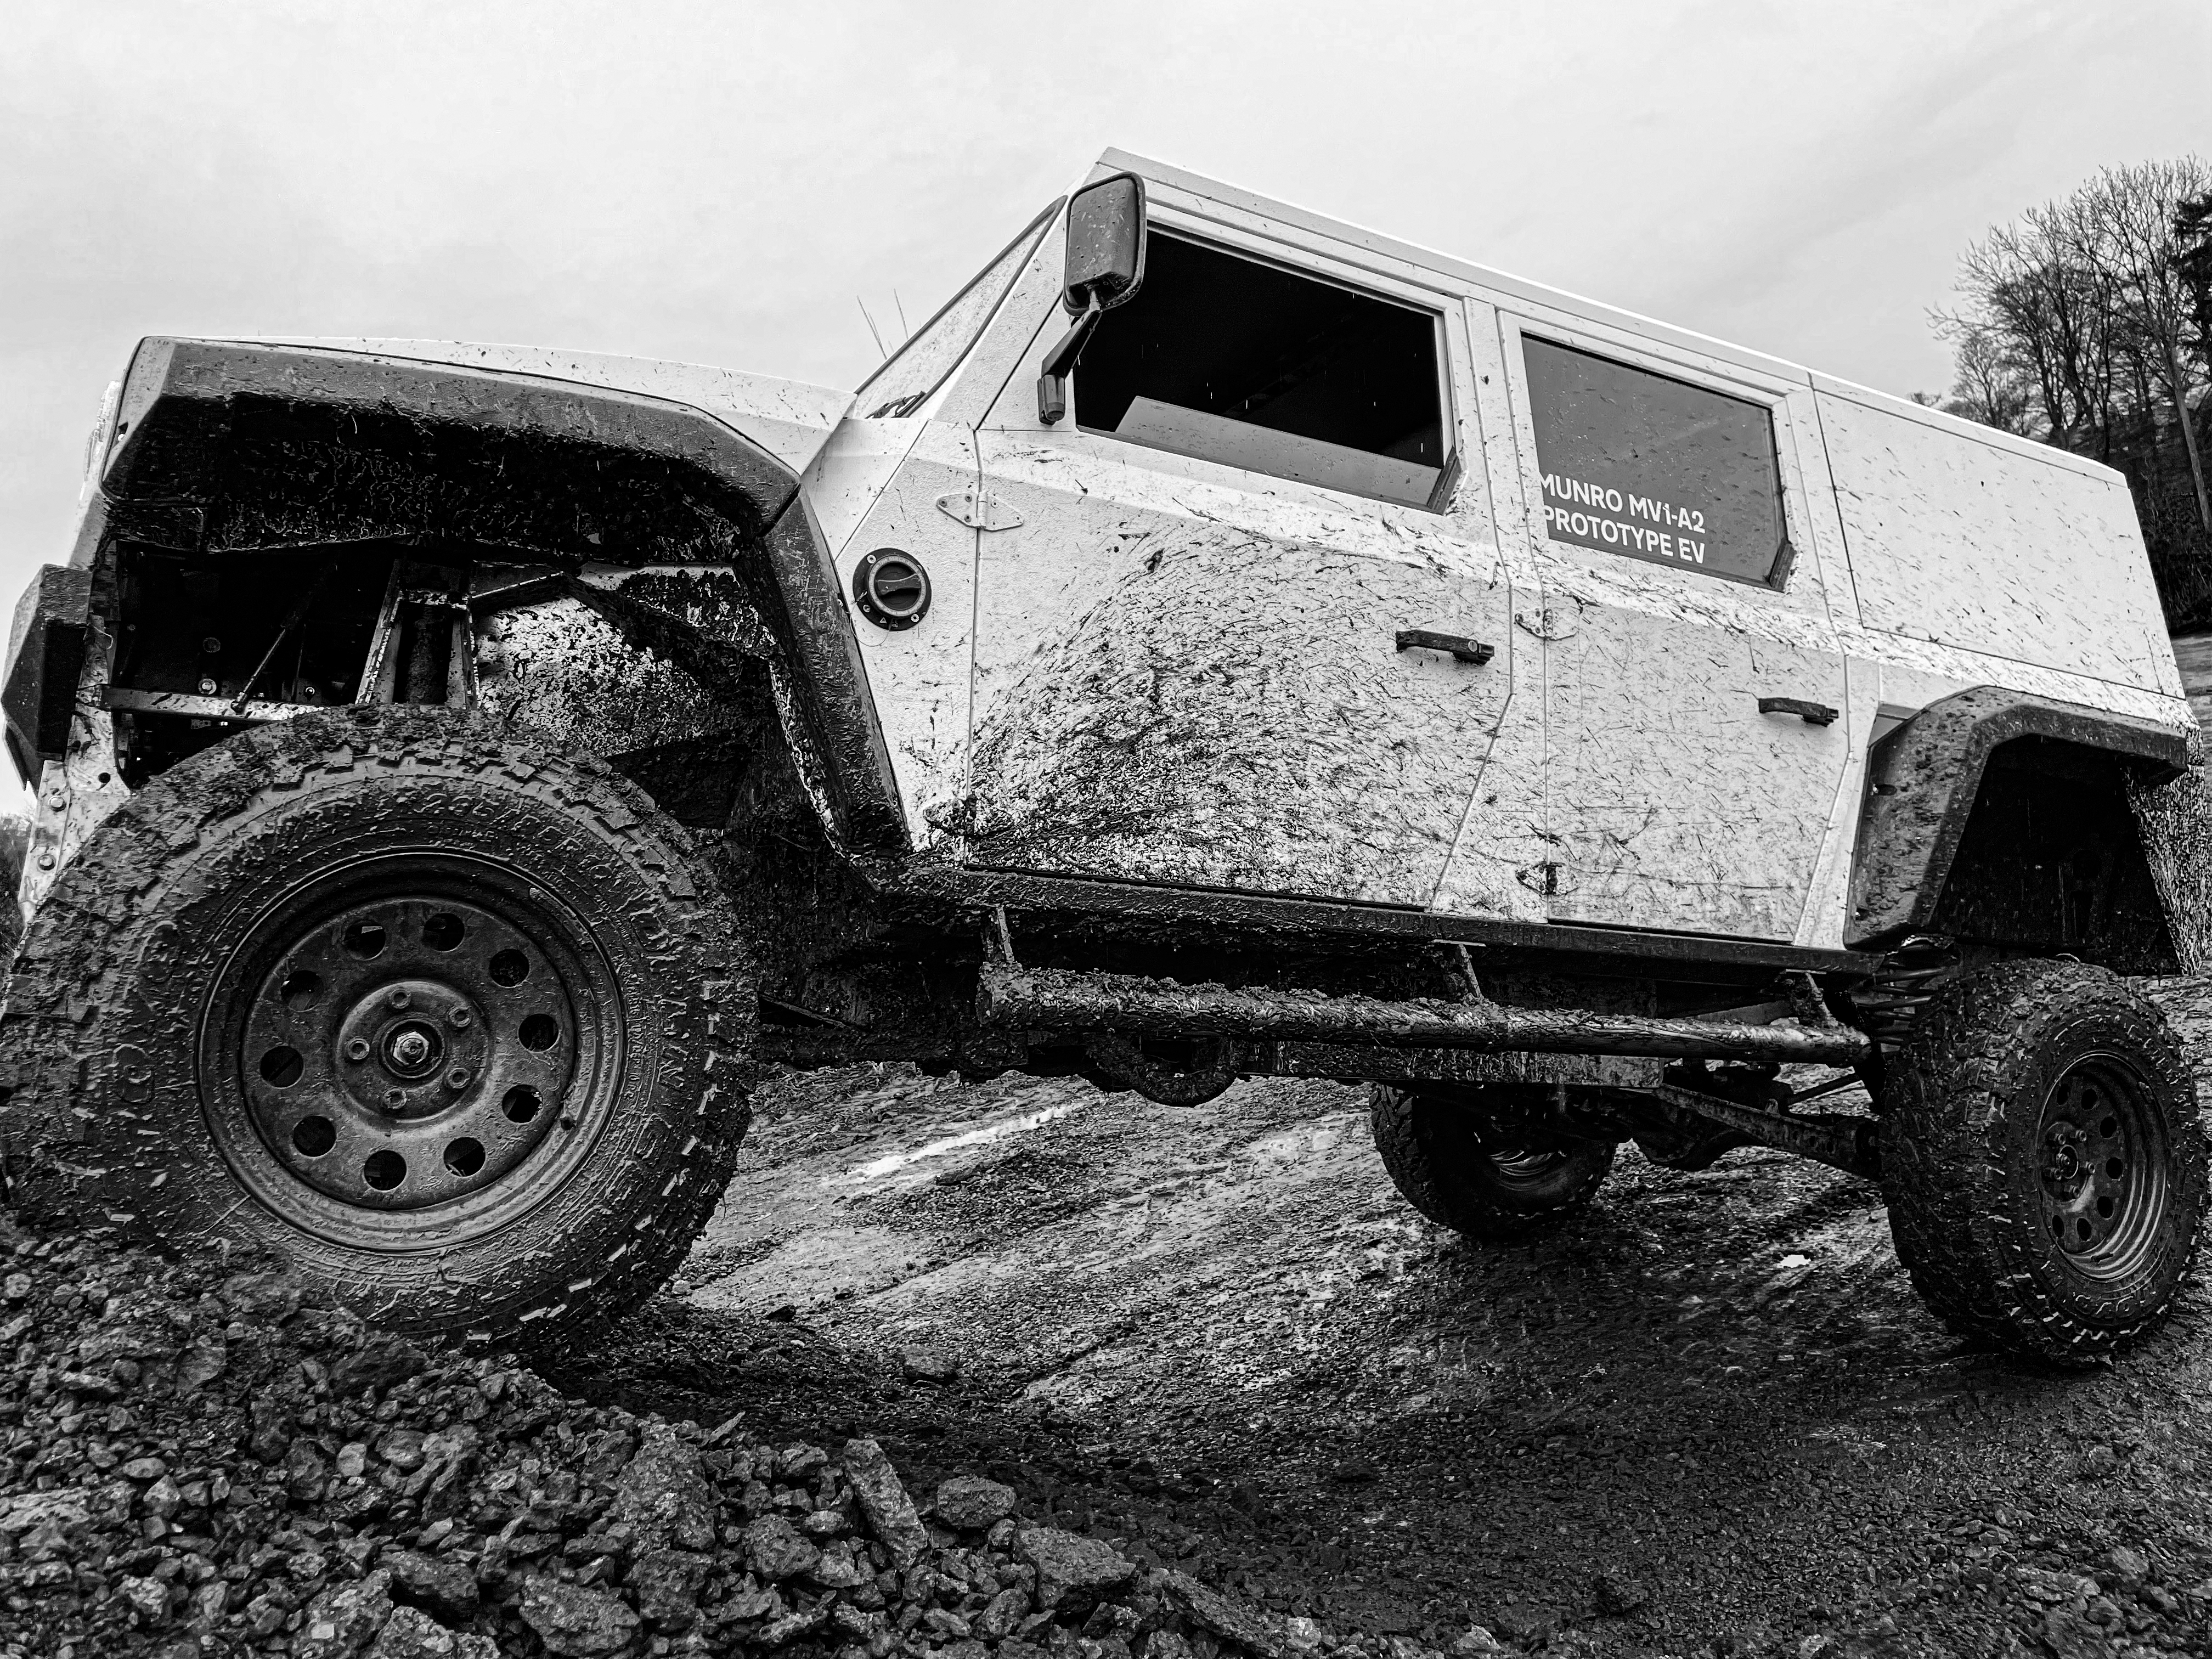 Munro Vehicles secures £750,000 funding from Elbow Beach Capital